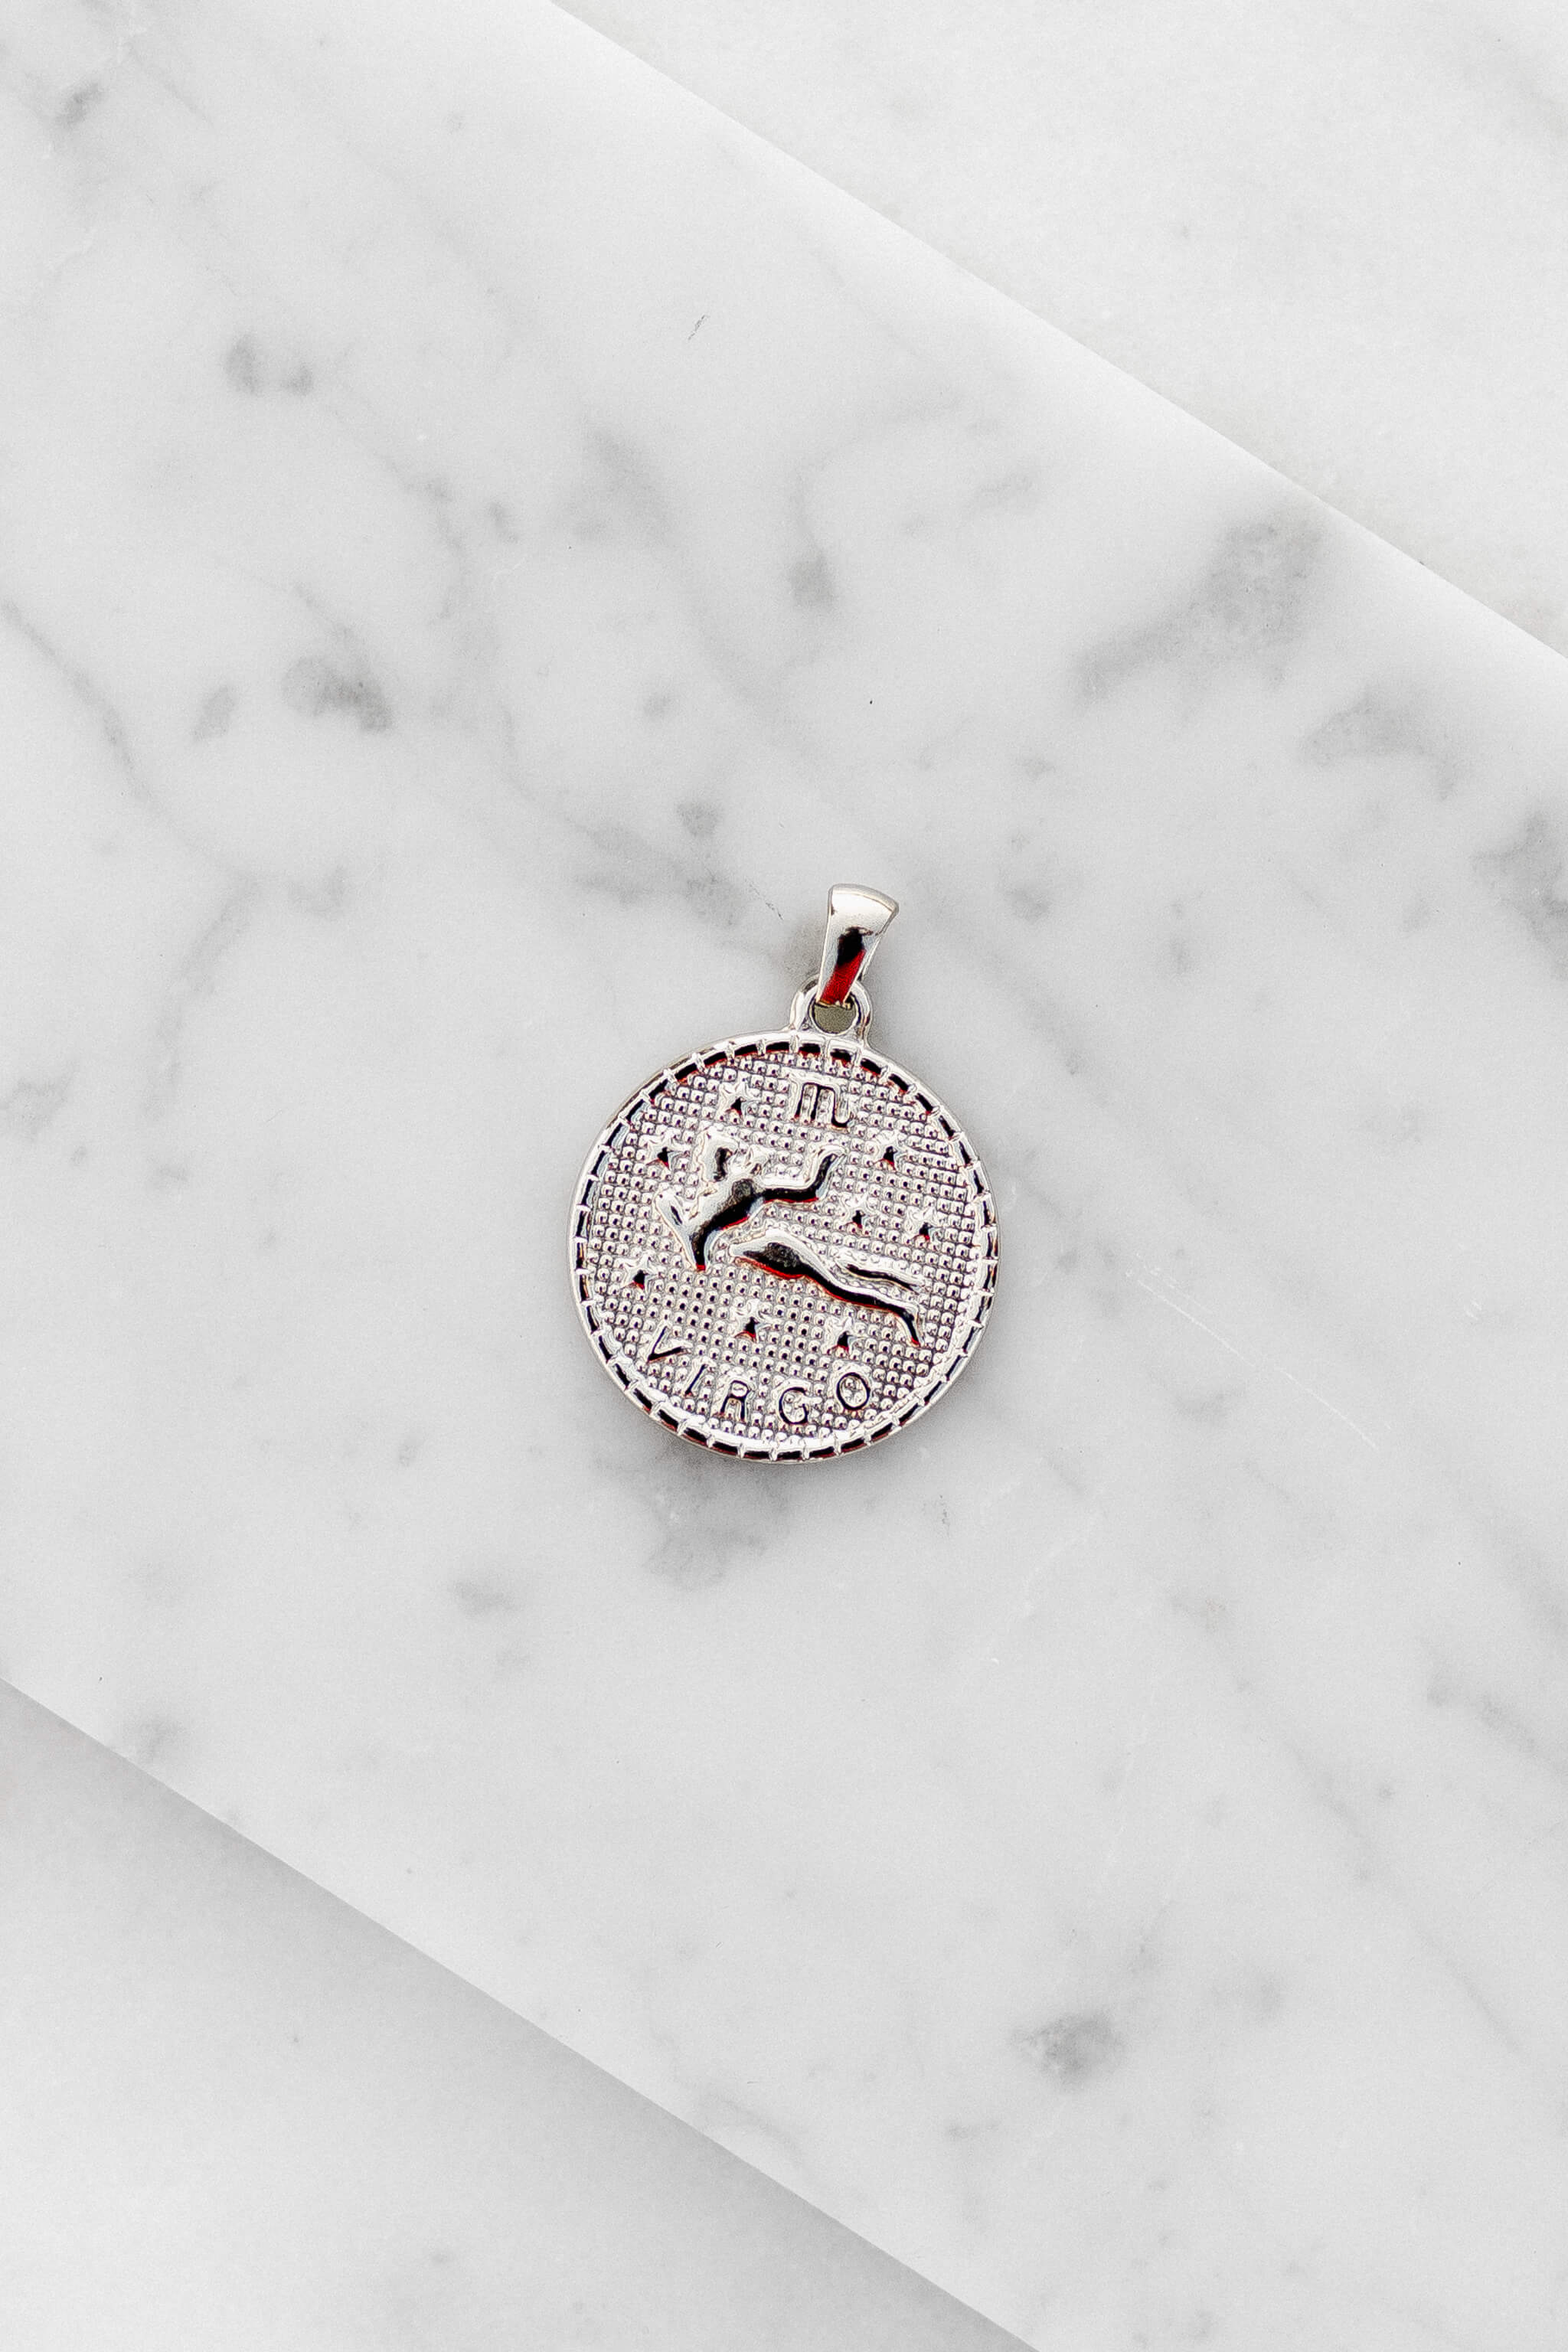 Virgo zodiac sign silver coin charm laying on a white marble